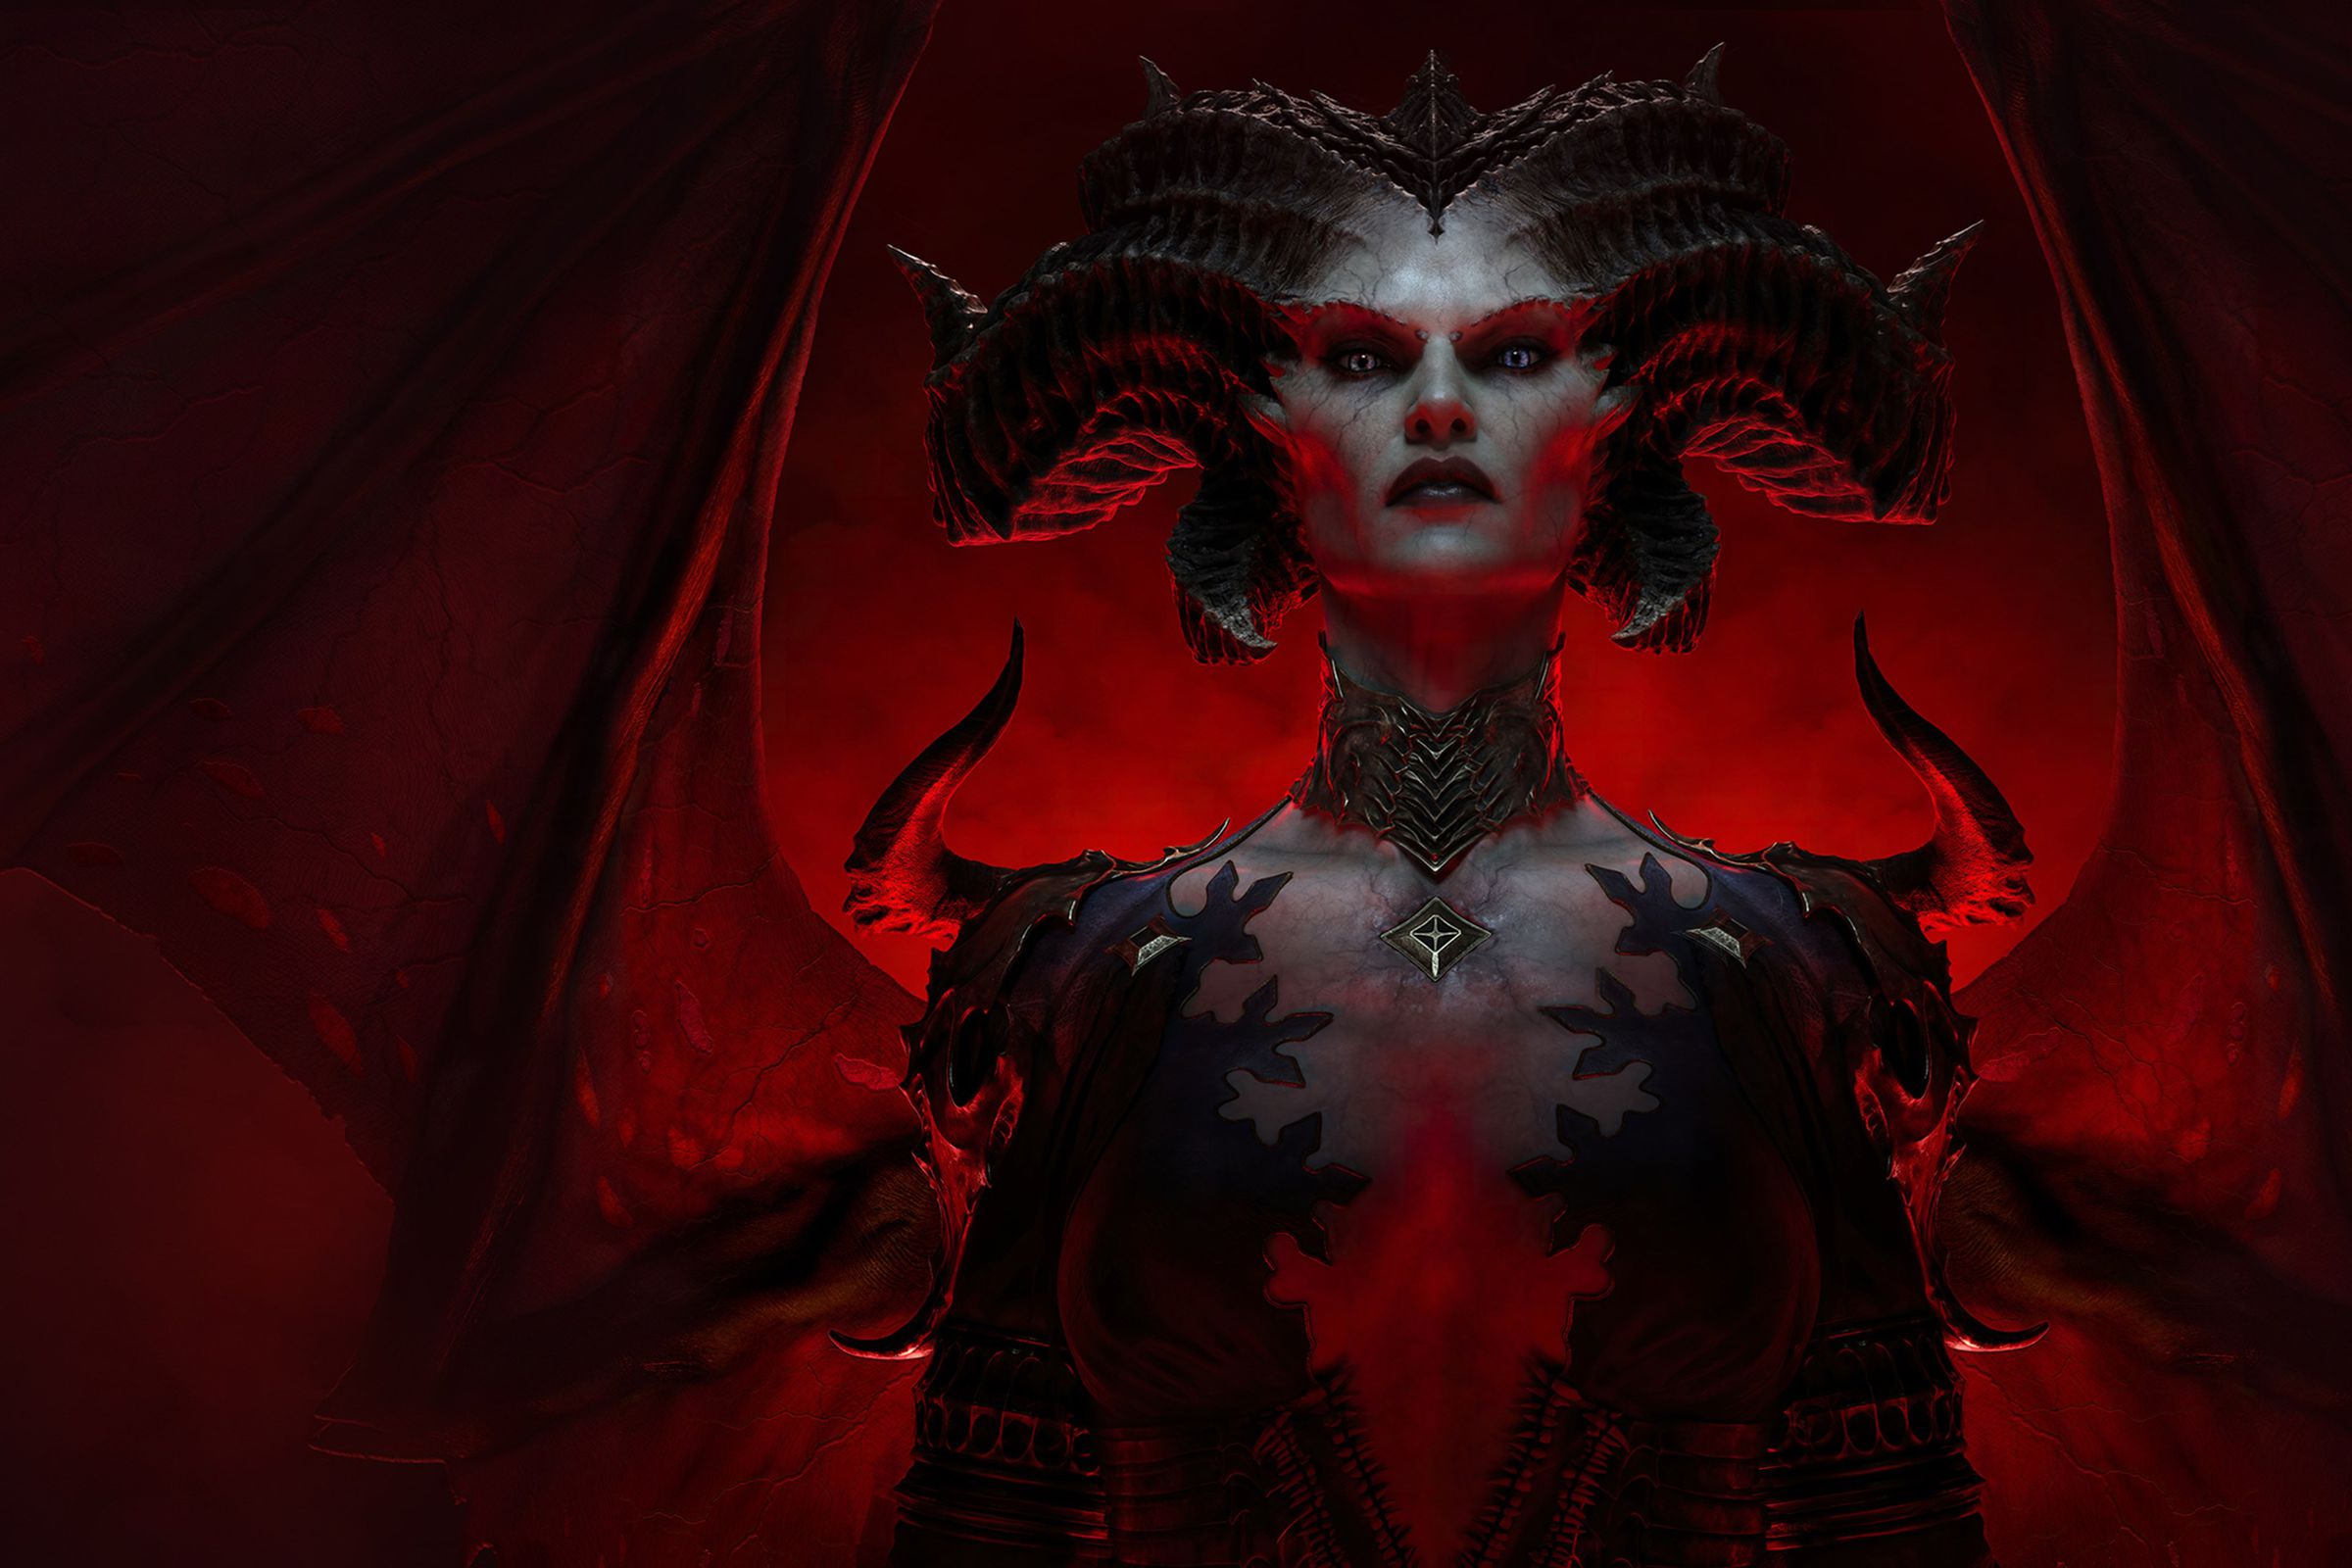 Promotional art for the video game Diablo IV.